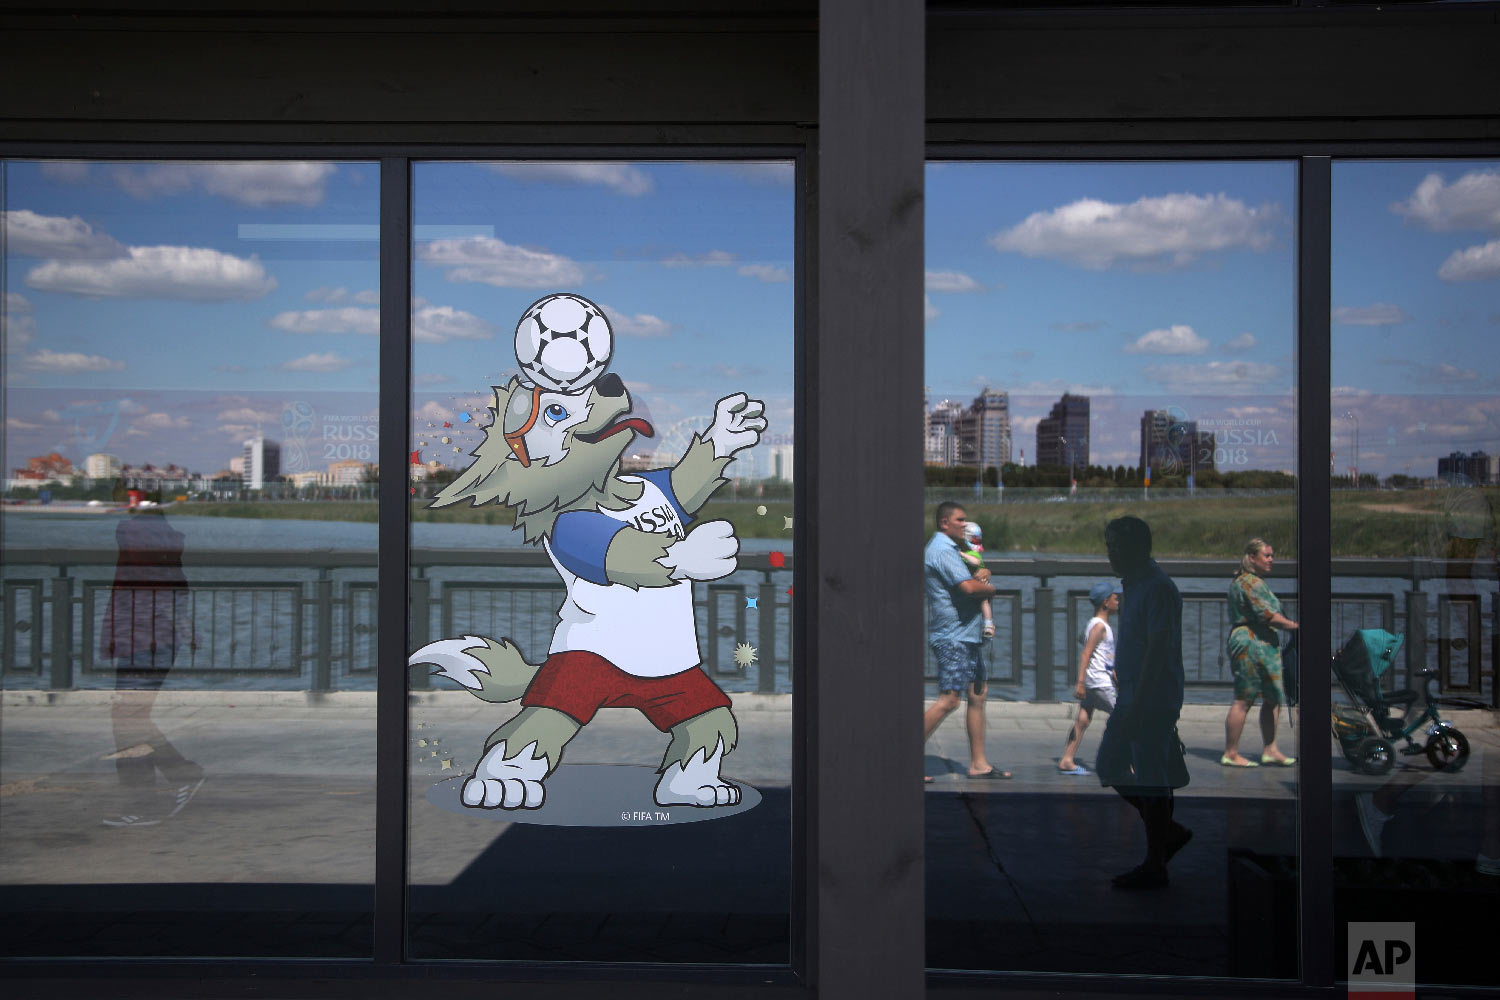  A volunteer, left, walks inside the Fan ID center as pedestrians are reflected in a window as they walk along the banks of the Volga river during the 2018 soccer World Cup in Kazan, Russia on June 29, 2018. (AP Photo/Thanassis Stavrakis) 